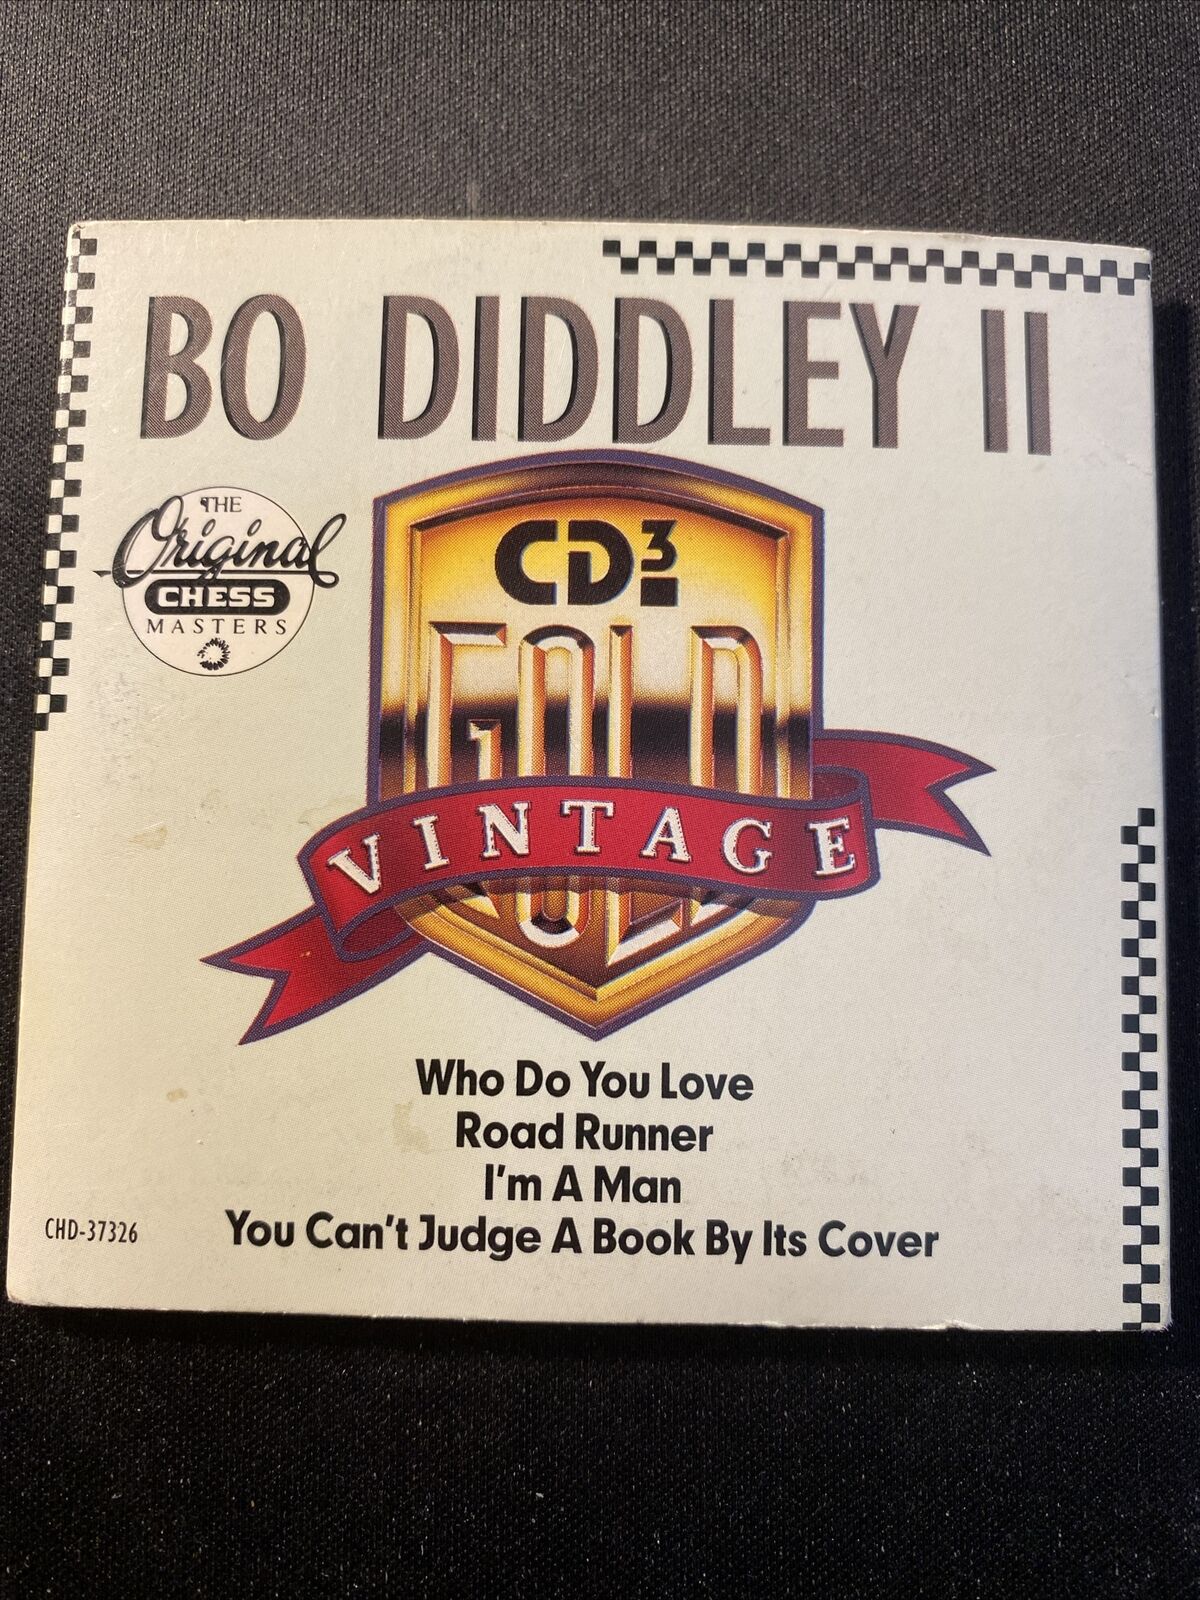 BO DIDDLEY Part II Vintage Gold MINI 3 INCH CD 4 songs 1989 USA CD3 RARE CHESS